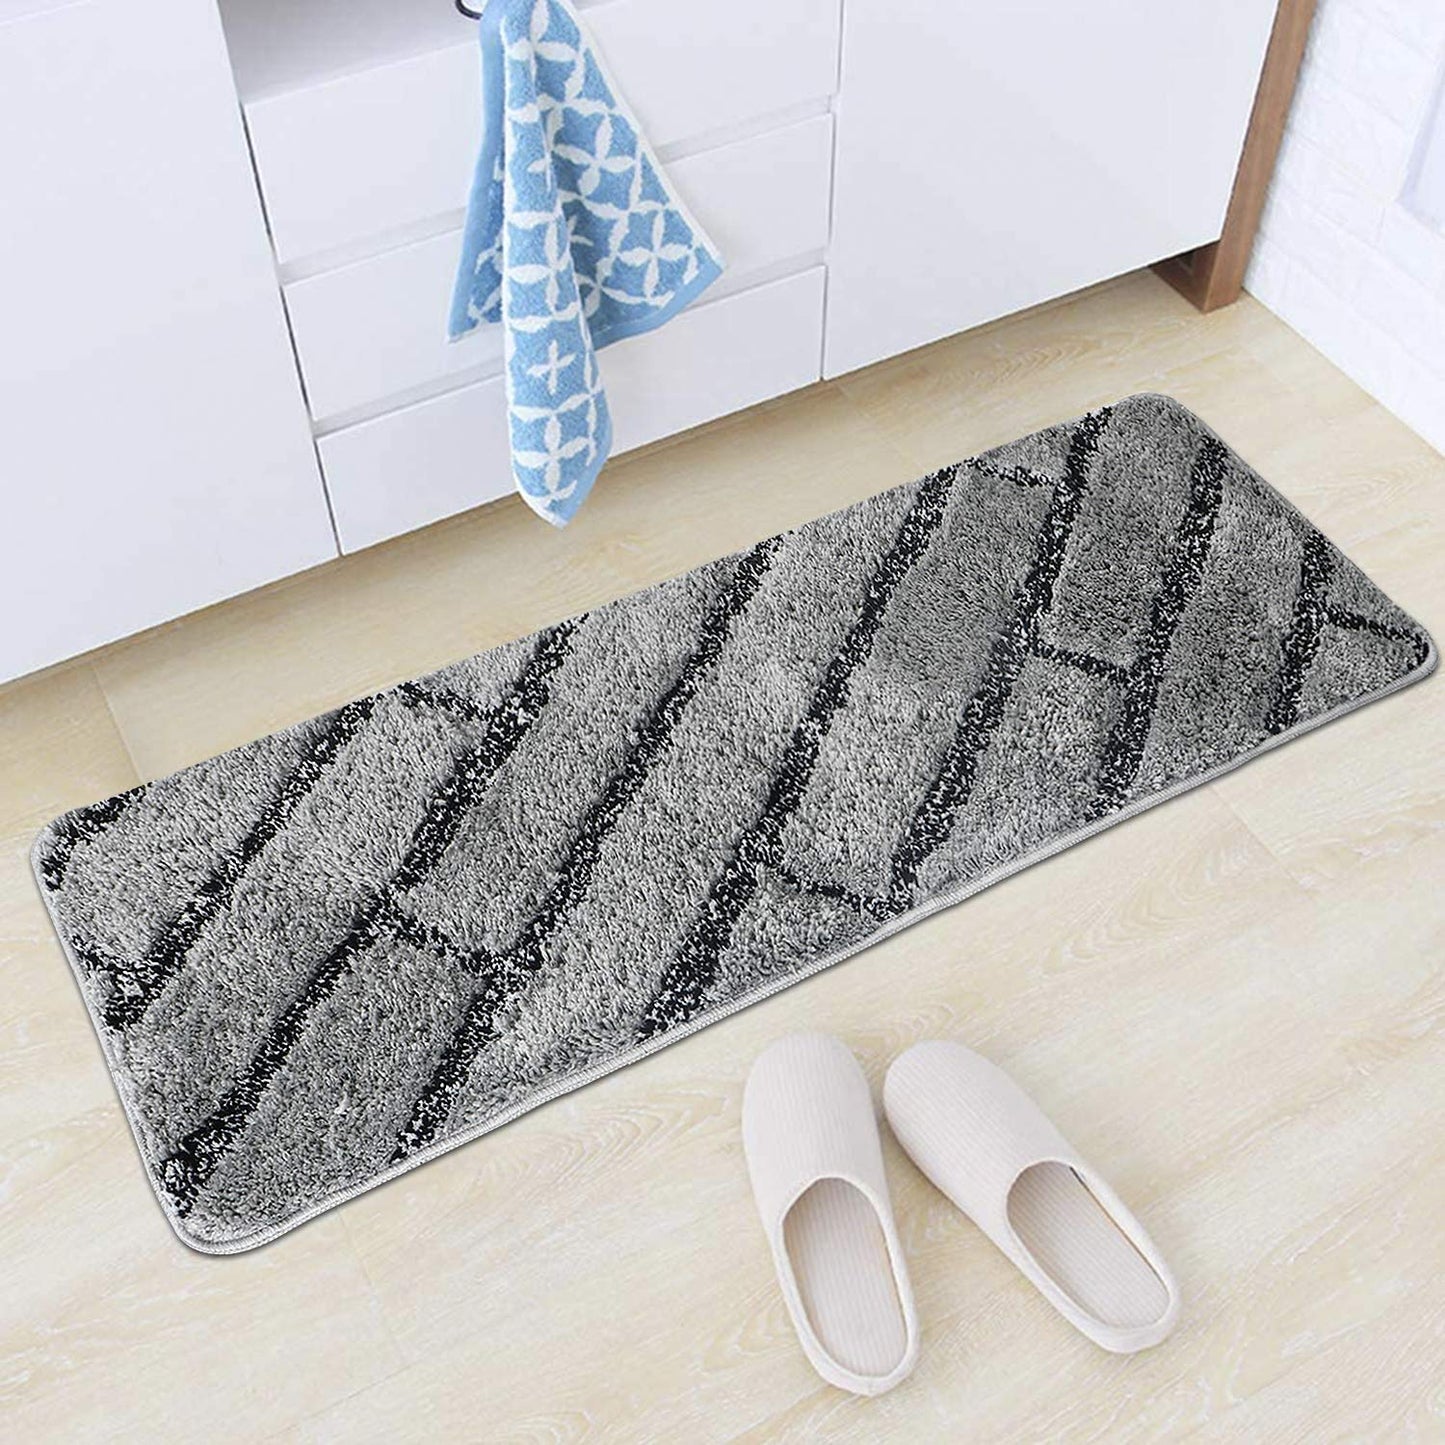 Kashyapa Rugs Collection - Grey & Black Super Soft Microfiber Polyester Shaggy Fluffy Hand tufted Carpet Runner.